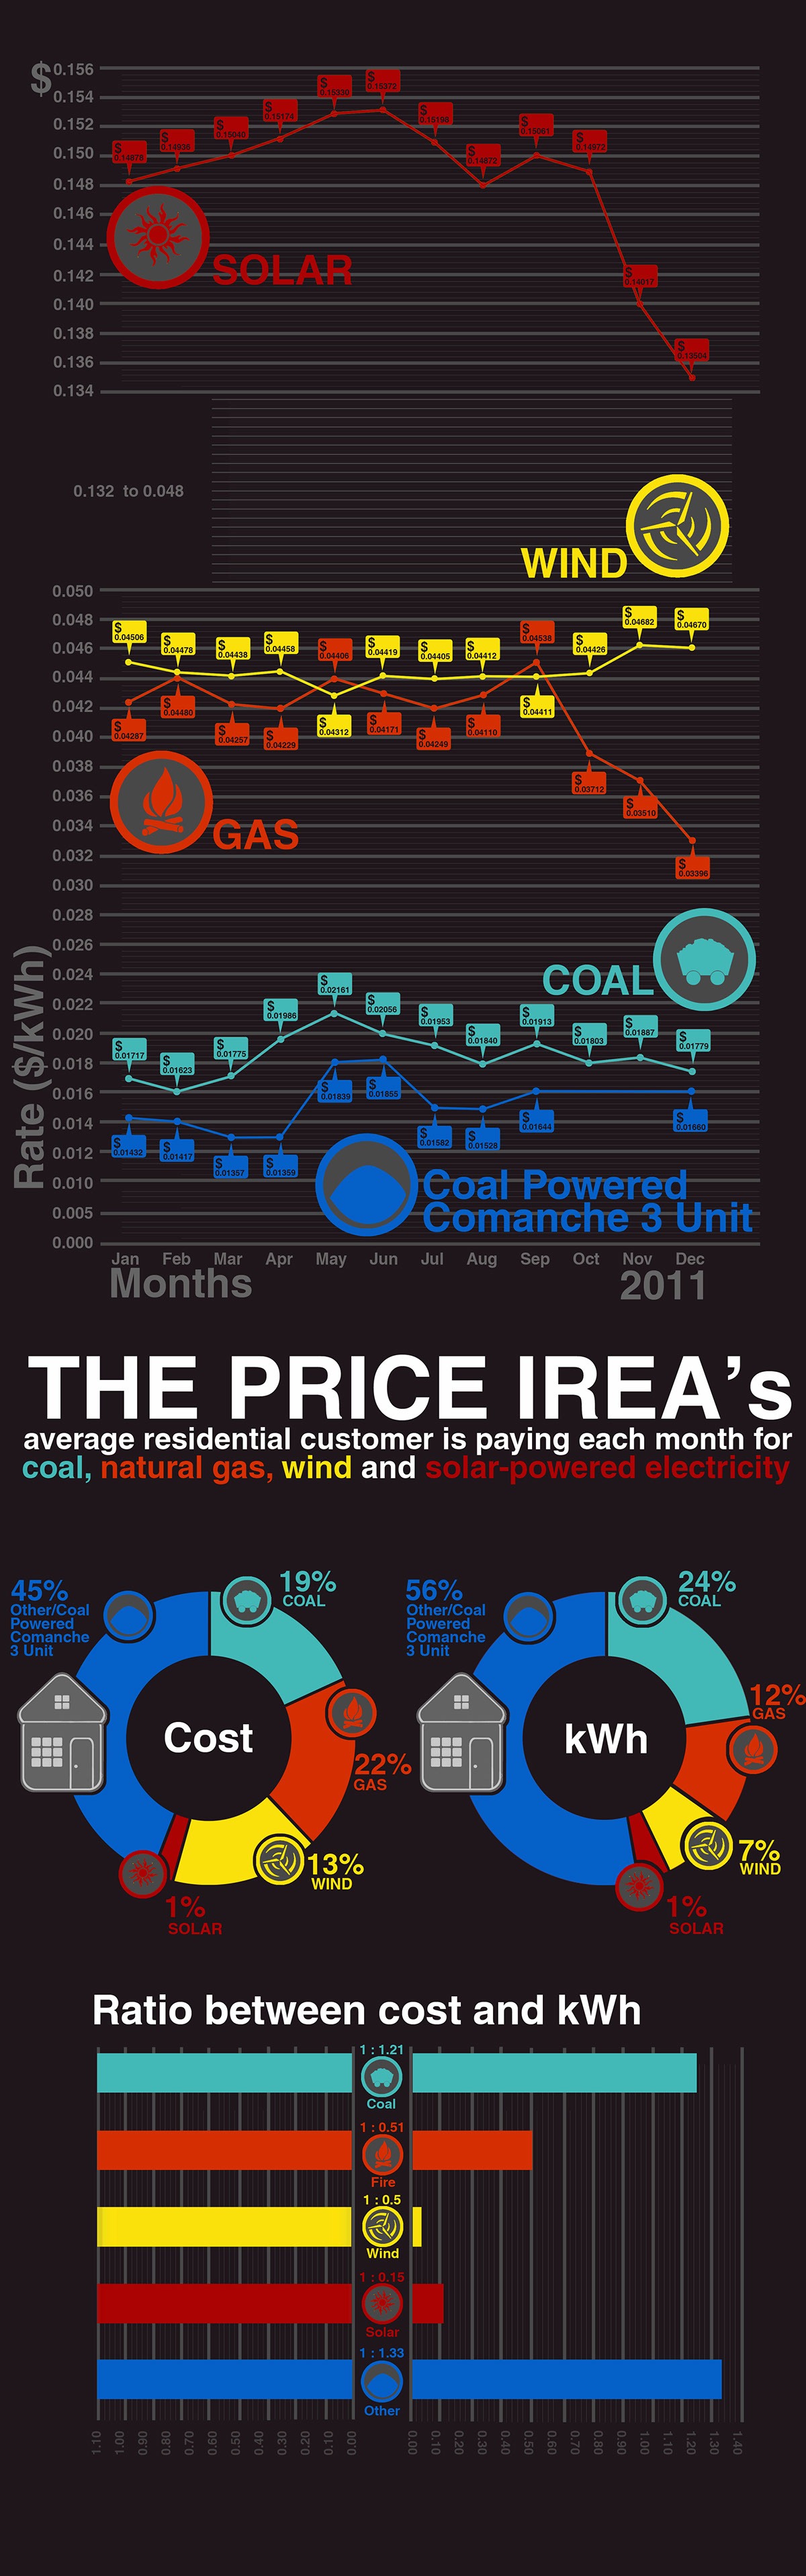 infographic data visualization mohit  graphics mglmedia energy solar wind Gas coal Cost electricity